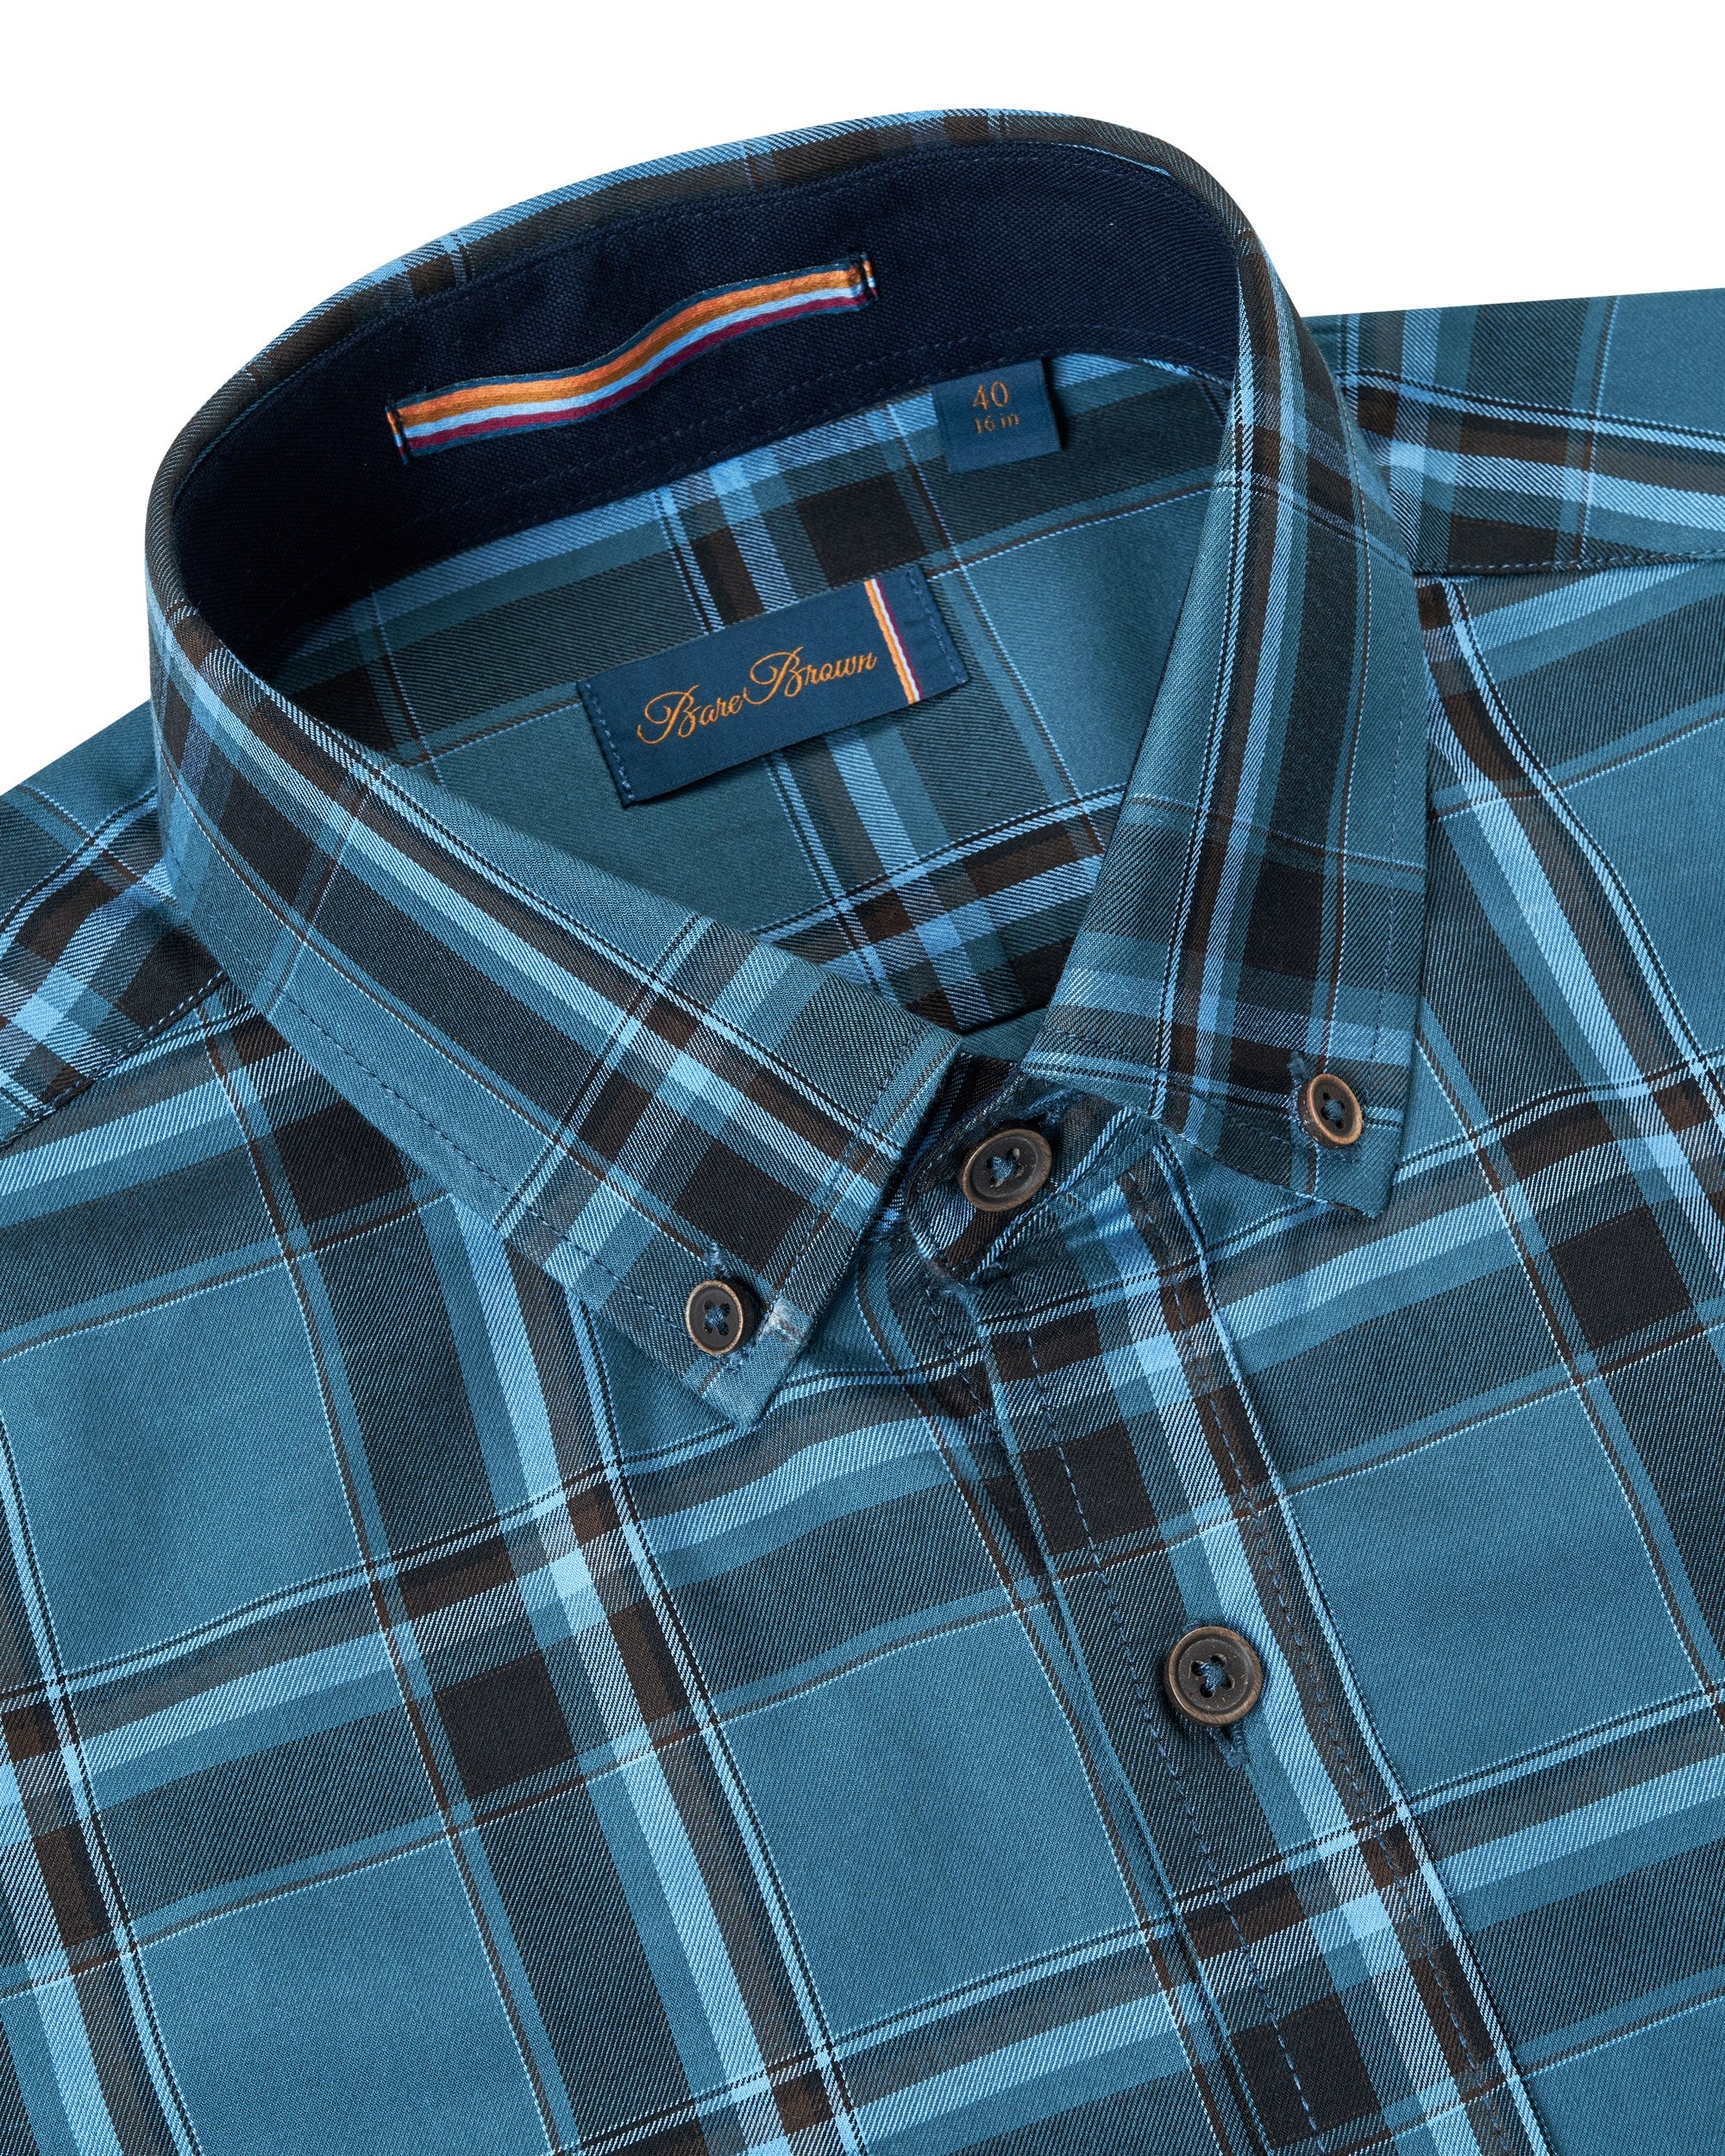 Bare Brown Buttondown Collar Cotton Checked Shirt, Slim Fit with Full Sleeves - Blue